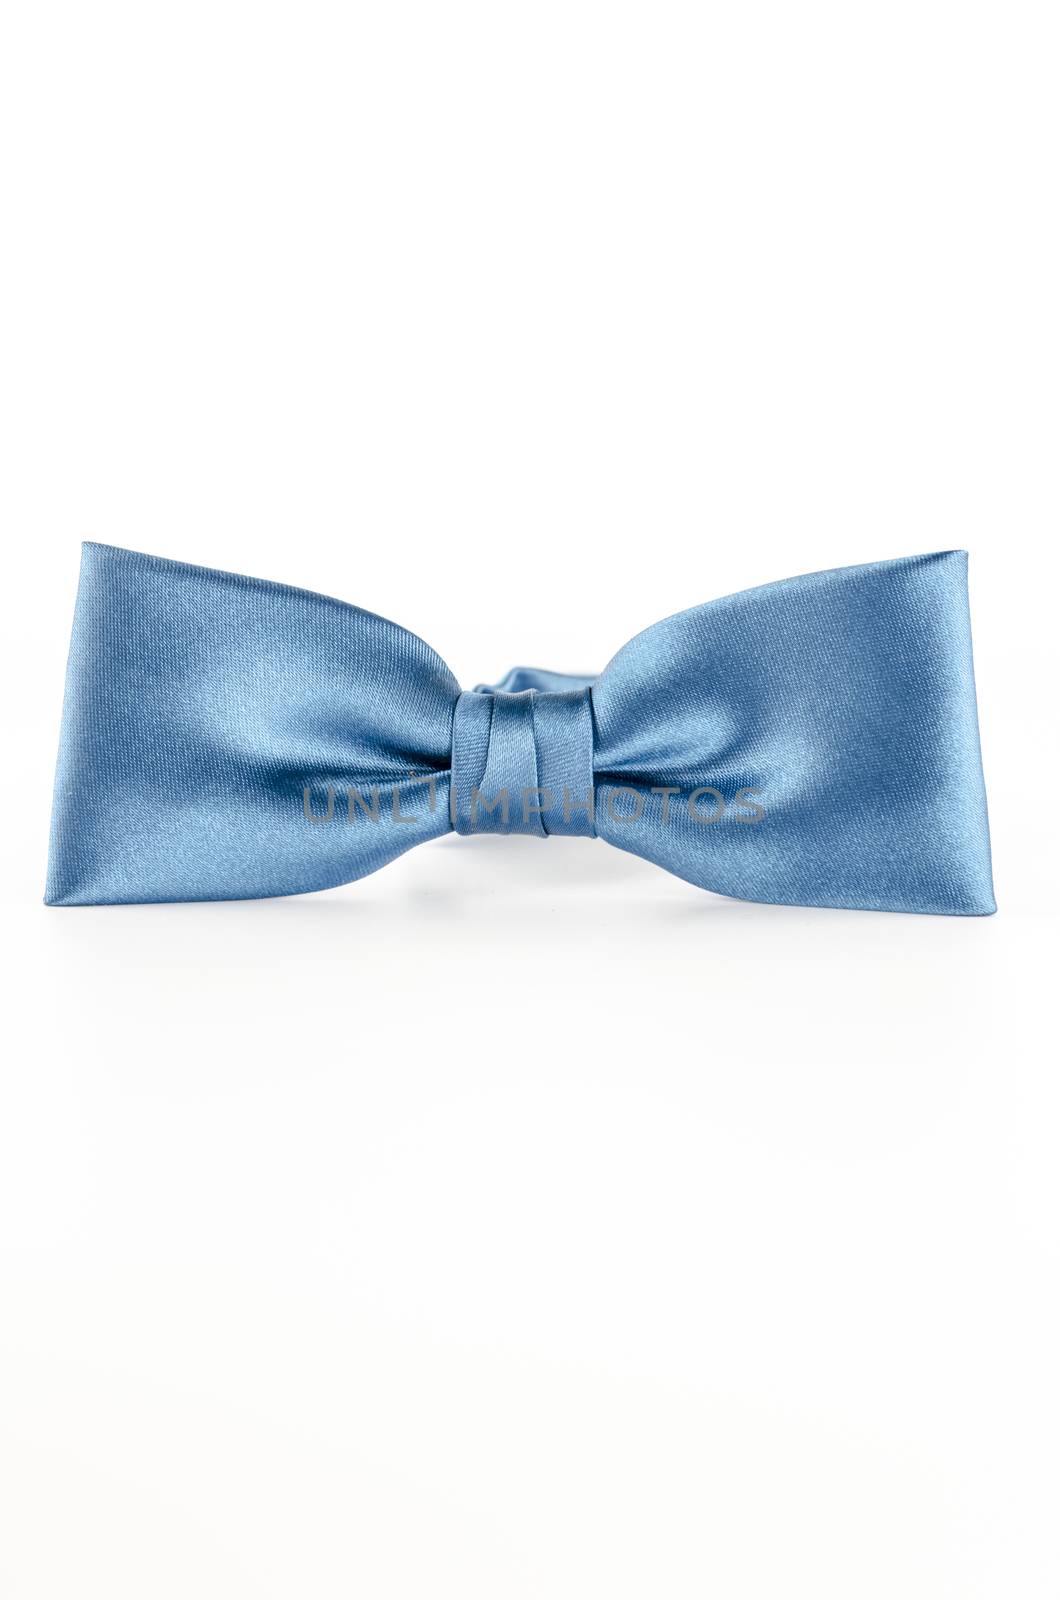 blue bow tie on a white background